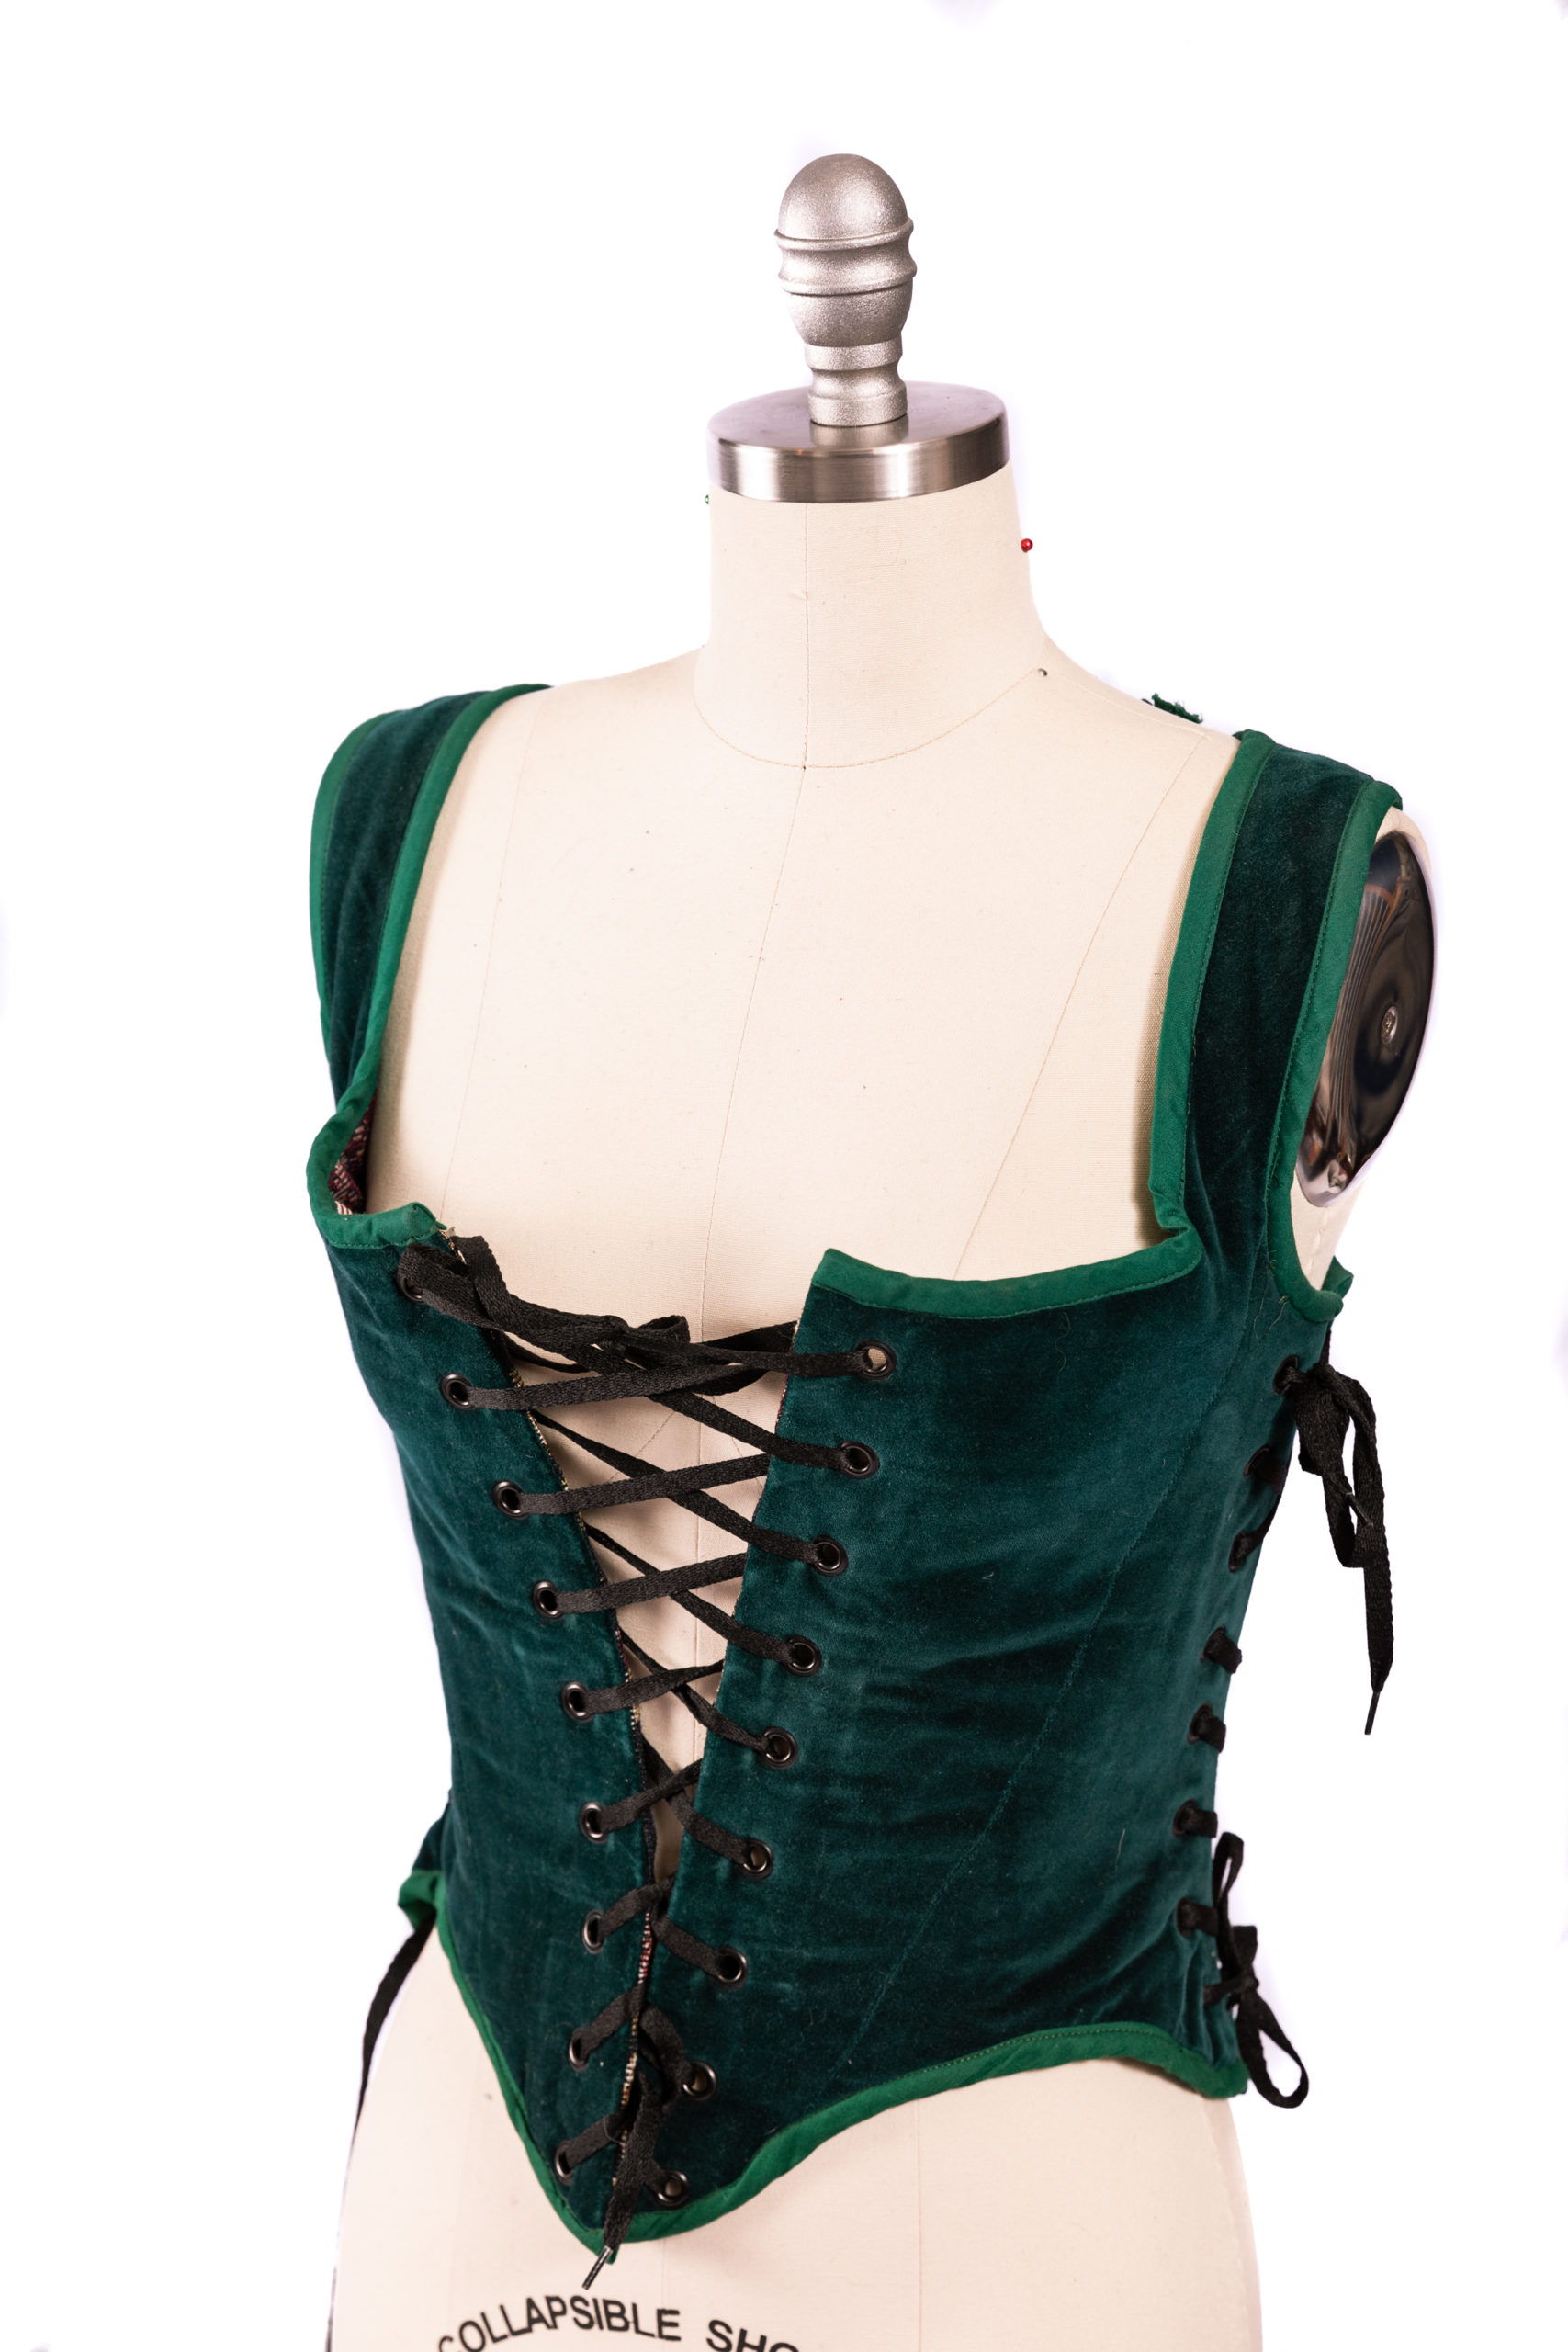 reverse-able bodice: green and leaf